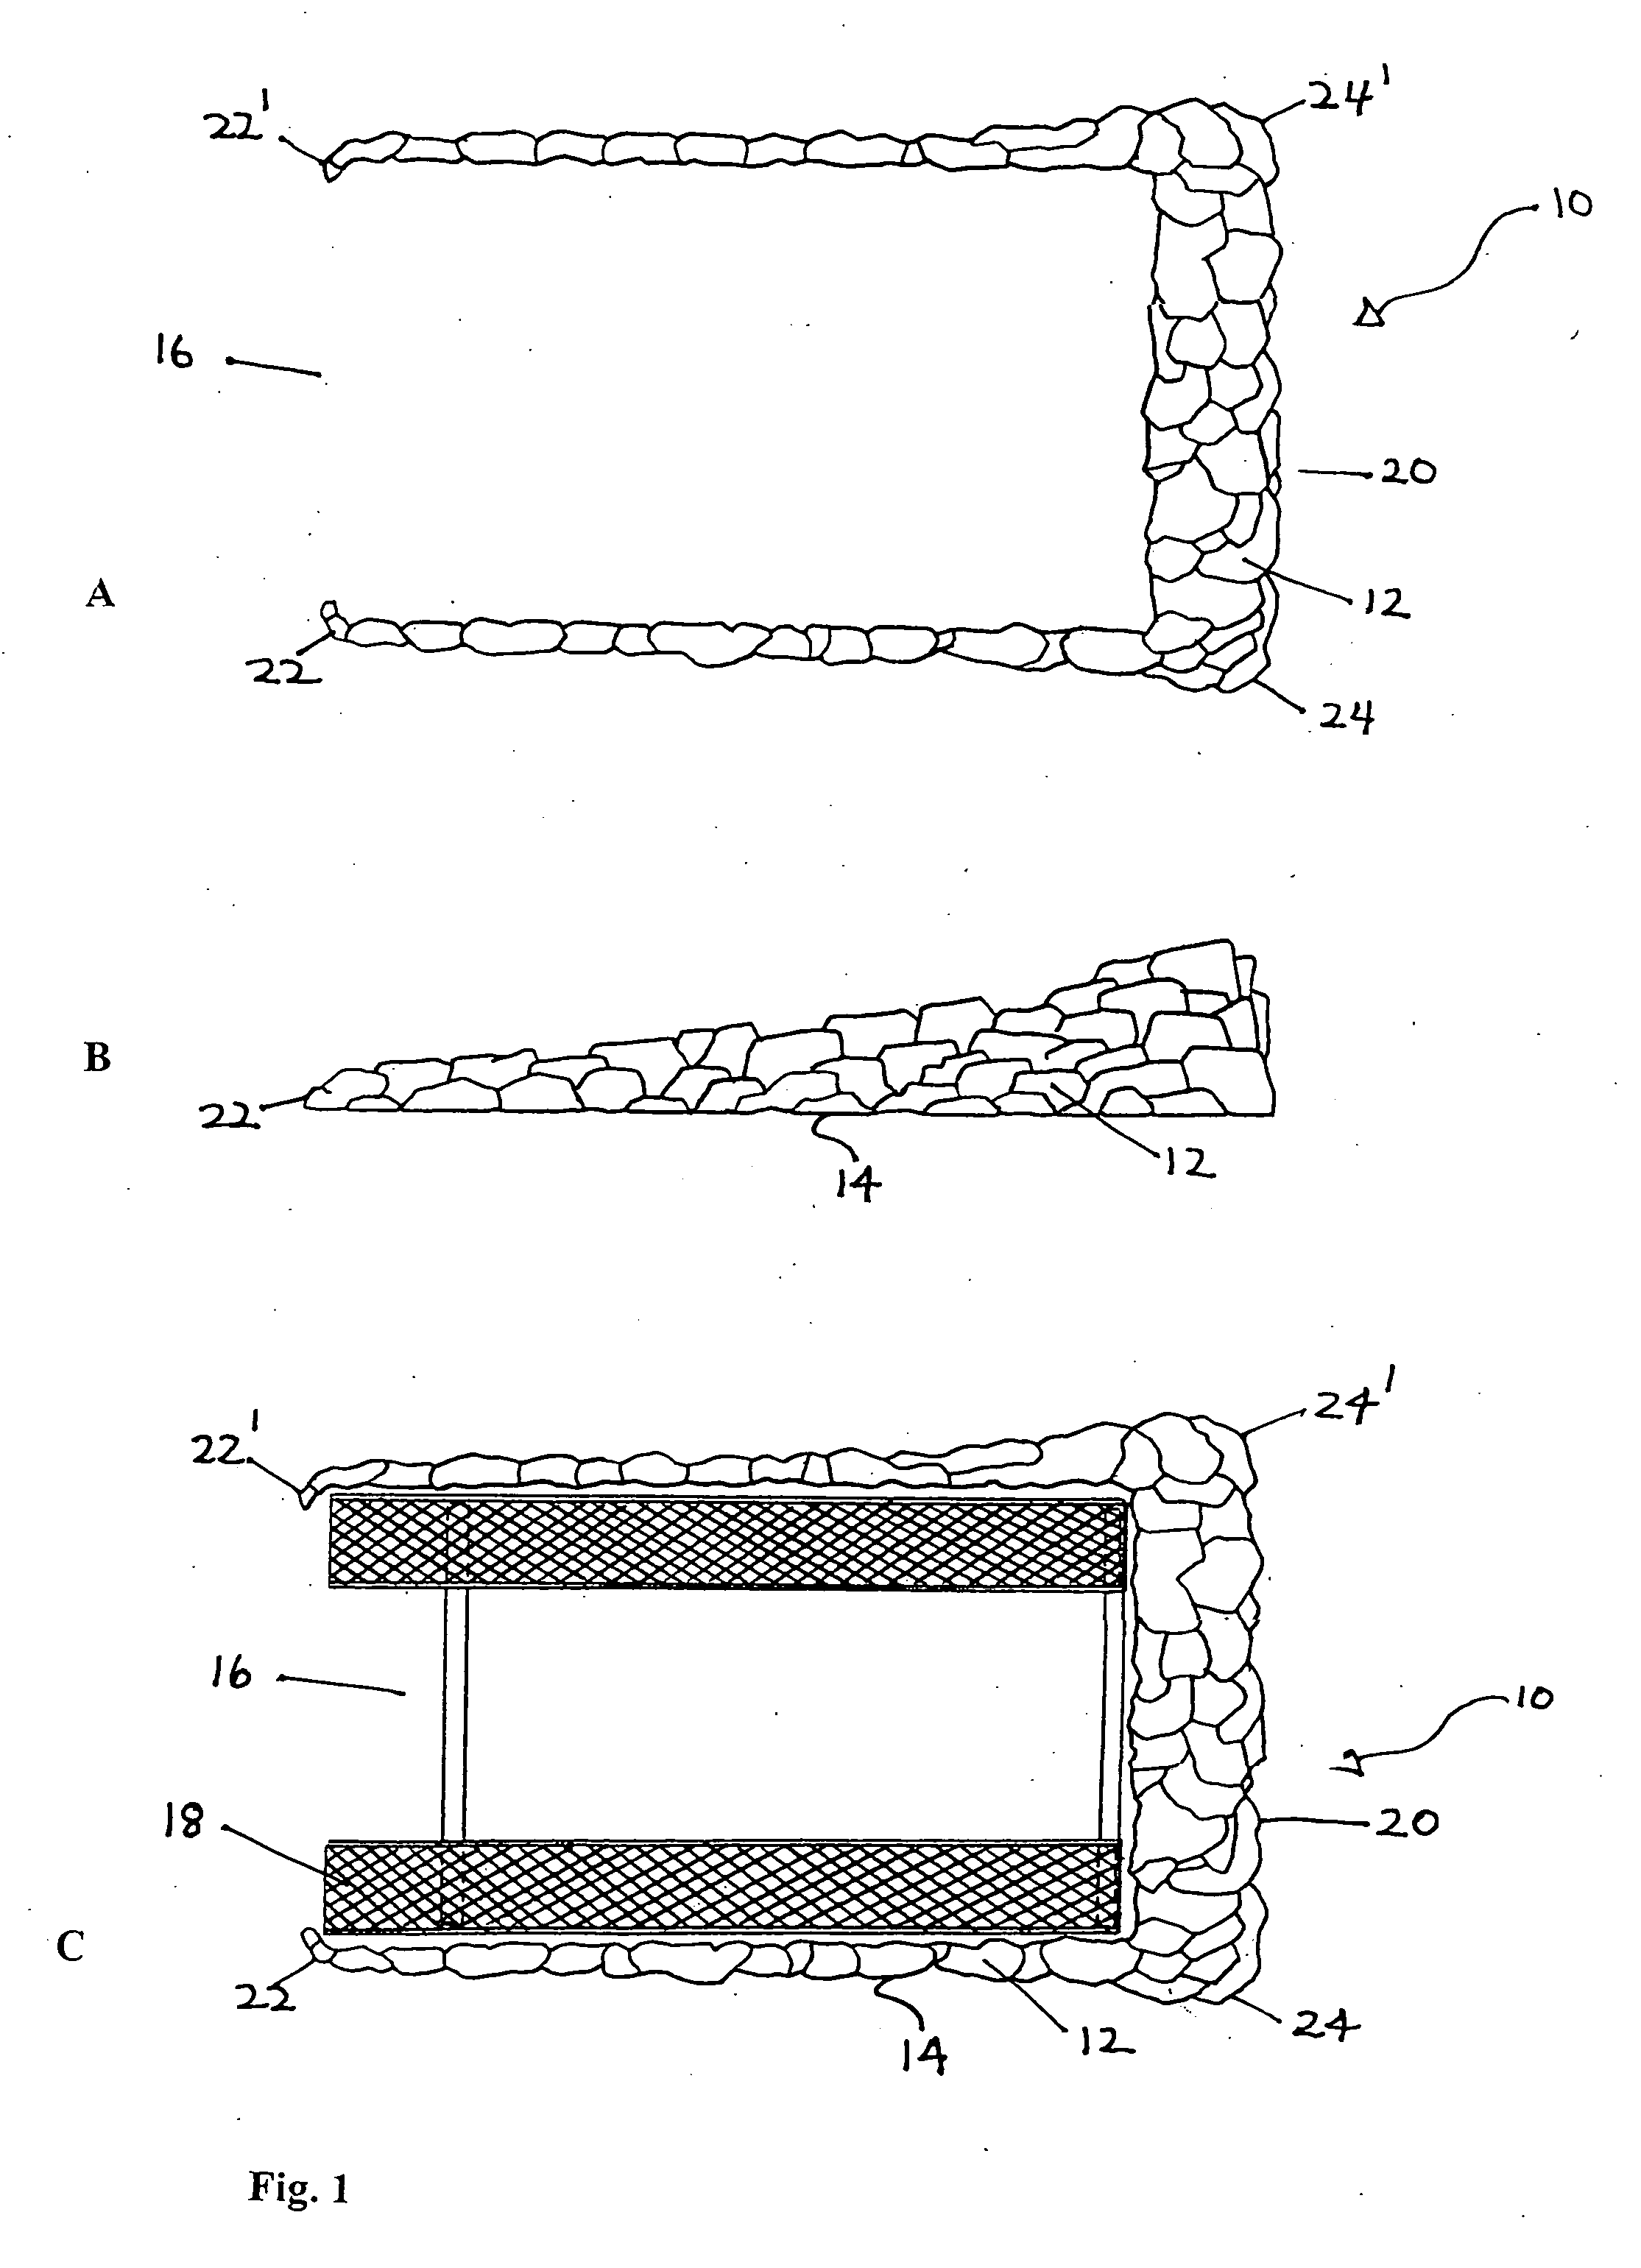 Method and composition for car ramp concealing fiberglass artificial geological rock formation